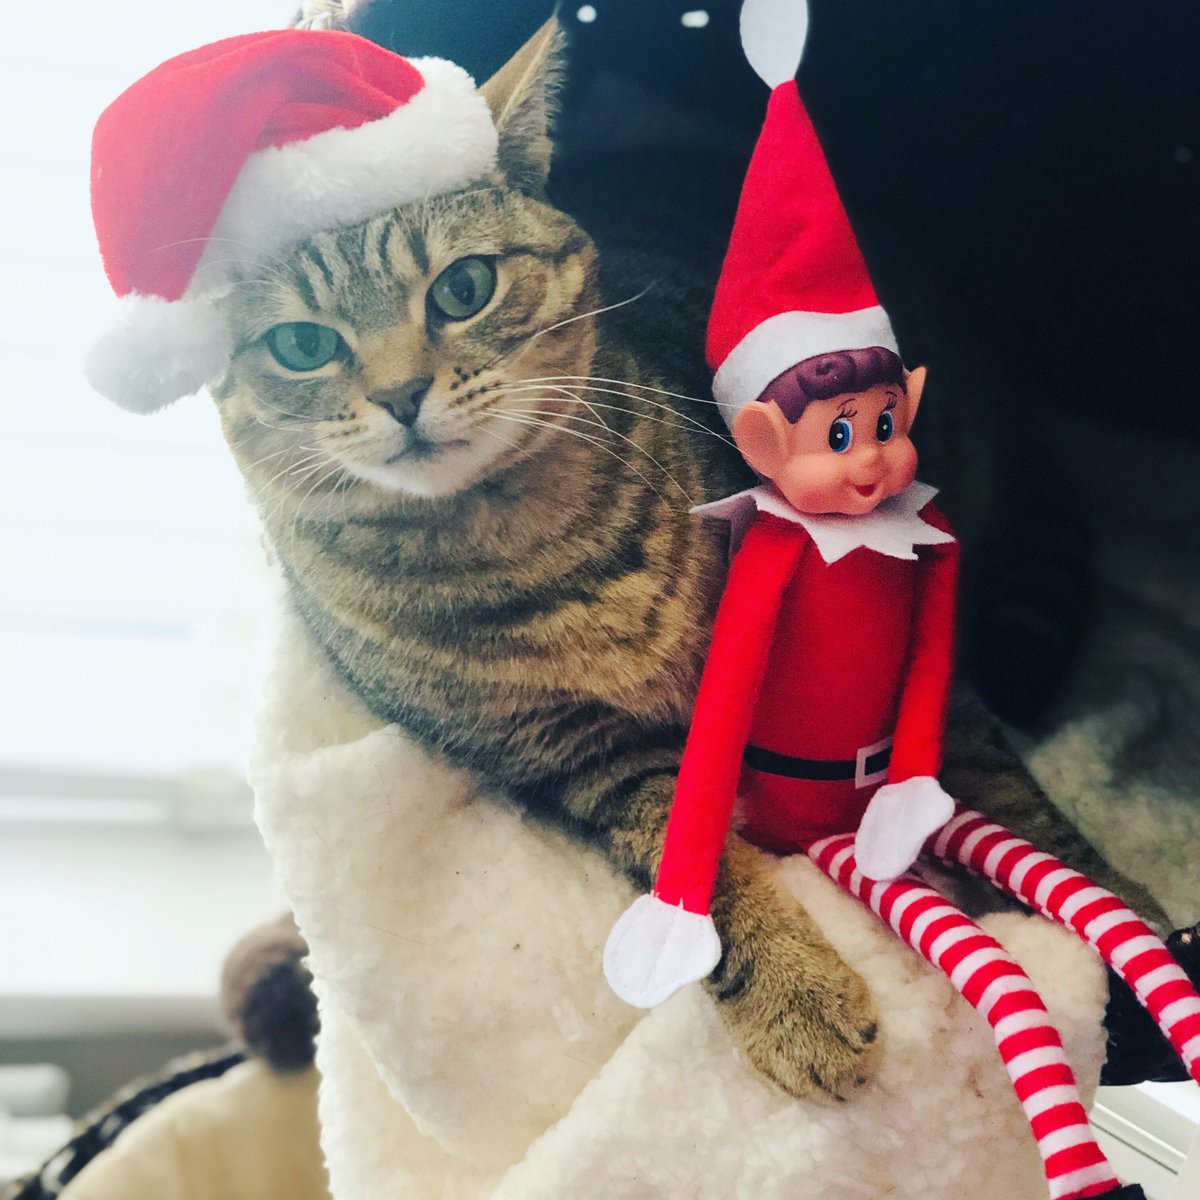 Percy is NOT happy with the #naughtyelf forcing Christmas on him in November. https://t.co/WRCJ97TvQv